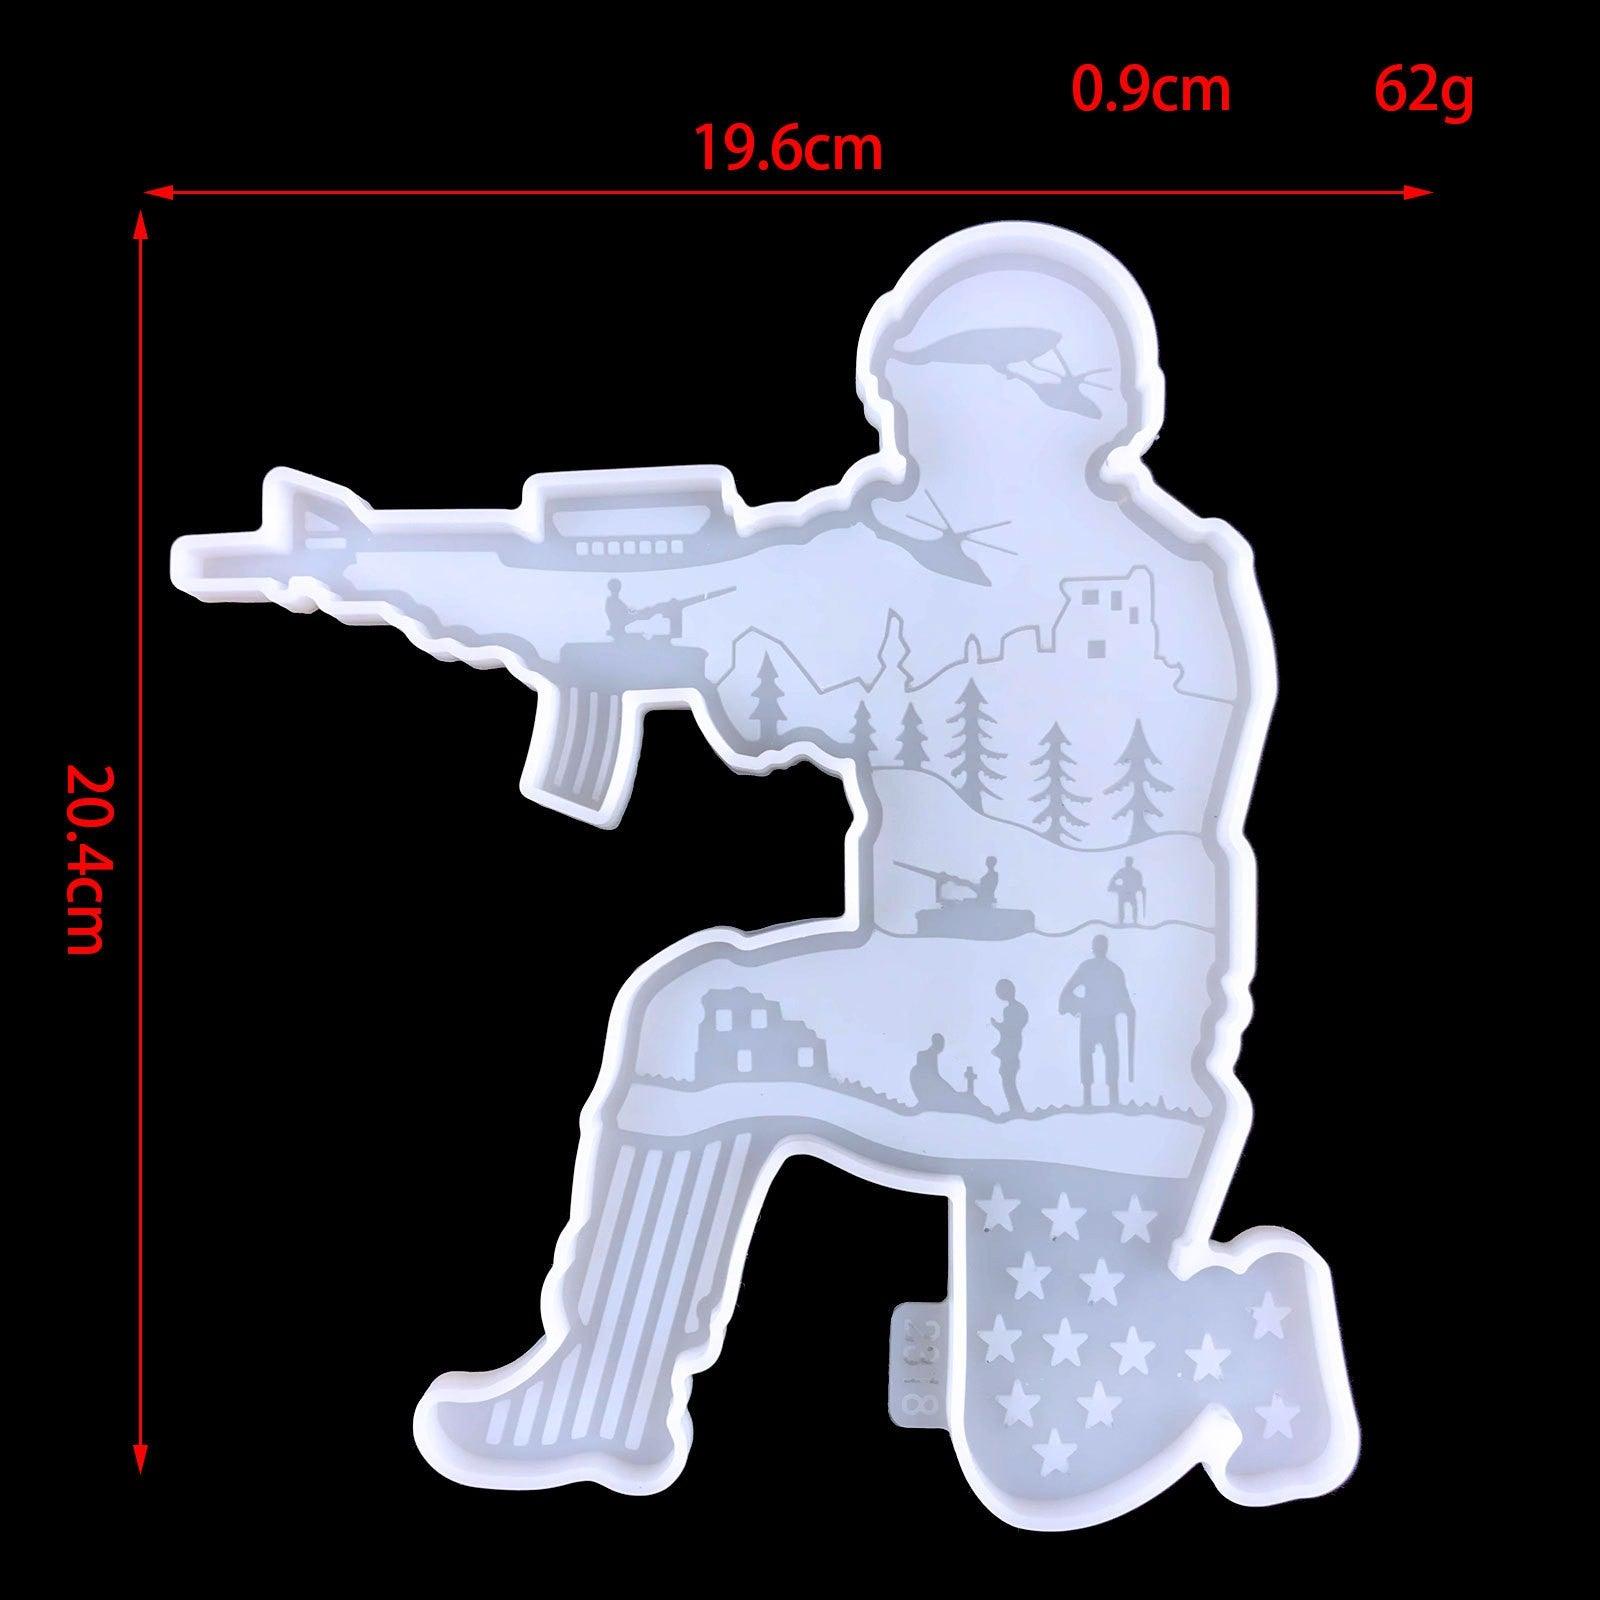 USA Soldier Decoration Mold for Epoxy Resin - Military Display Mold - Resin Mold U.S CLEARENCE - Art By Suleny Craft Store LLC